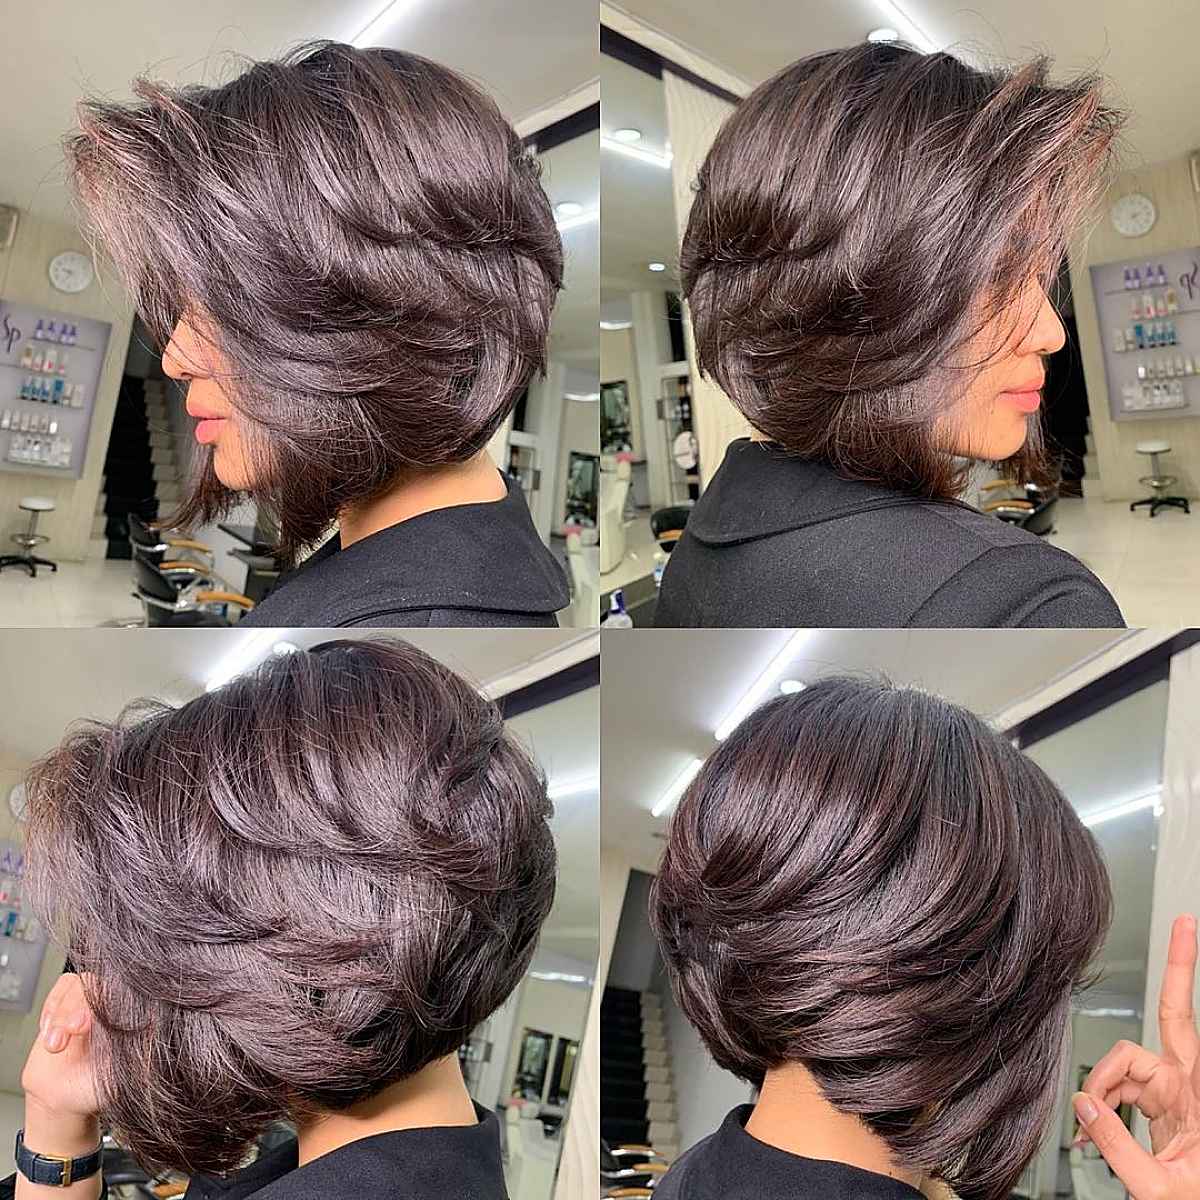 Neck-Length Haircut with Feathery Layers